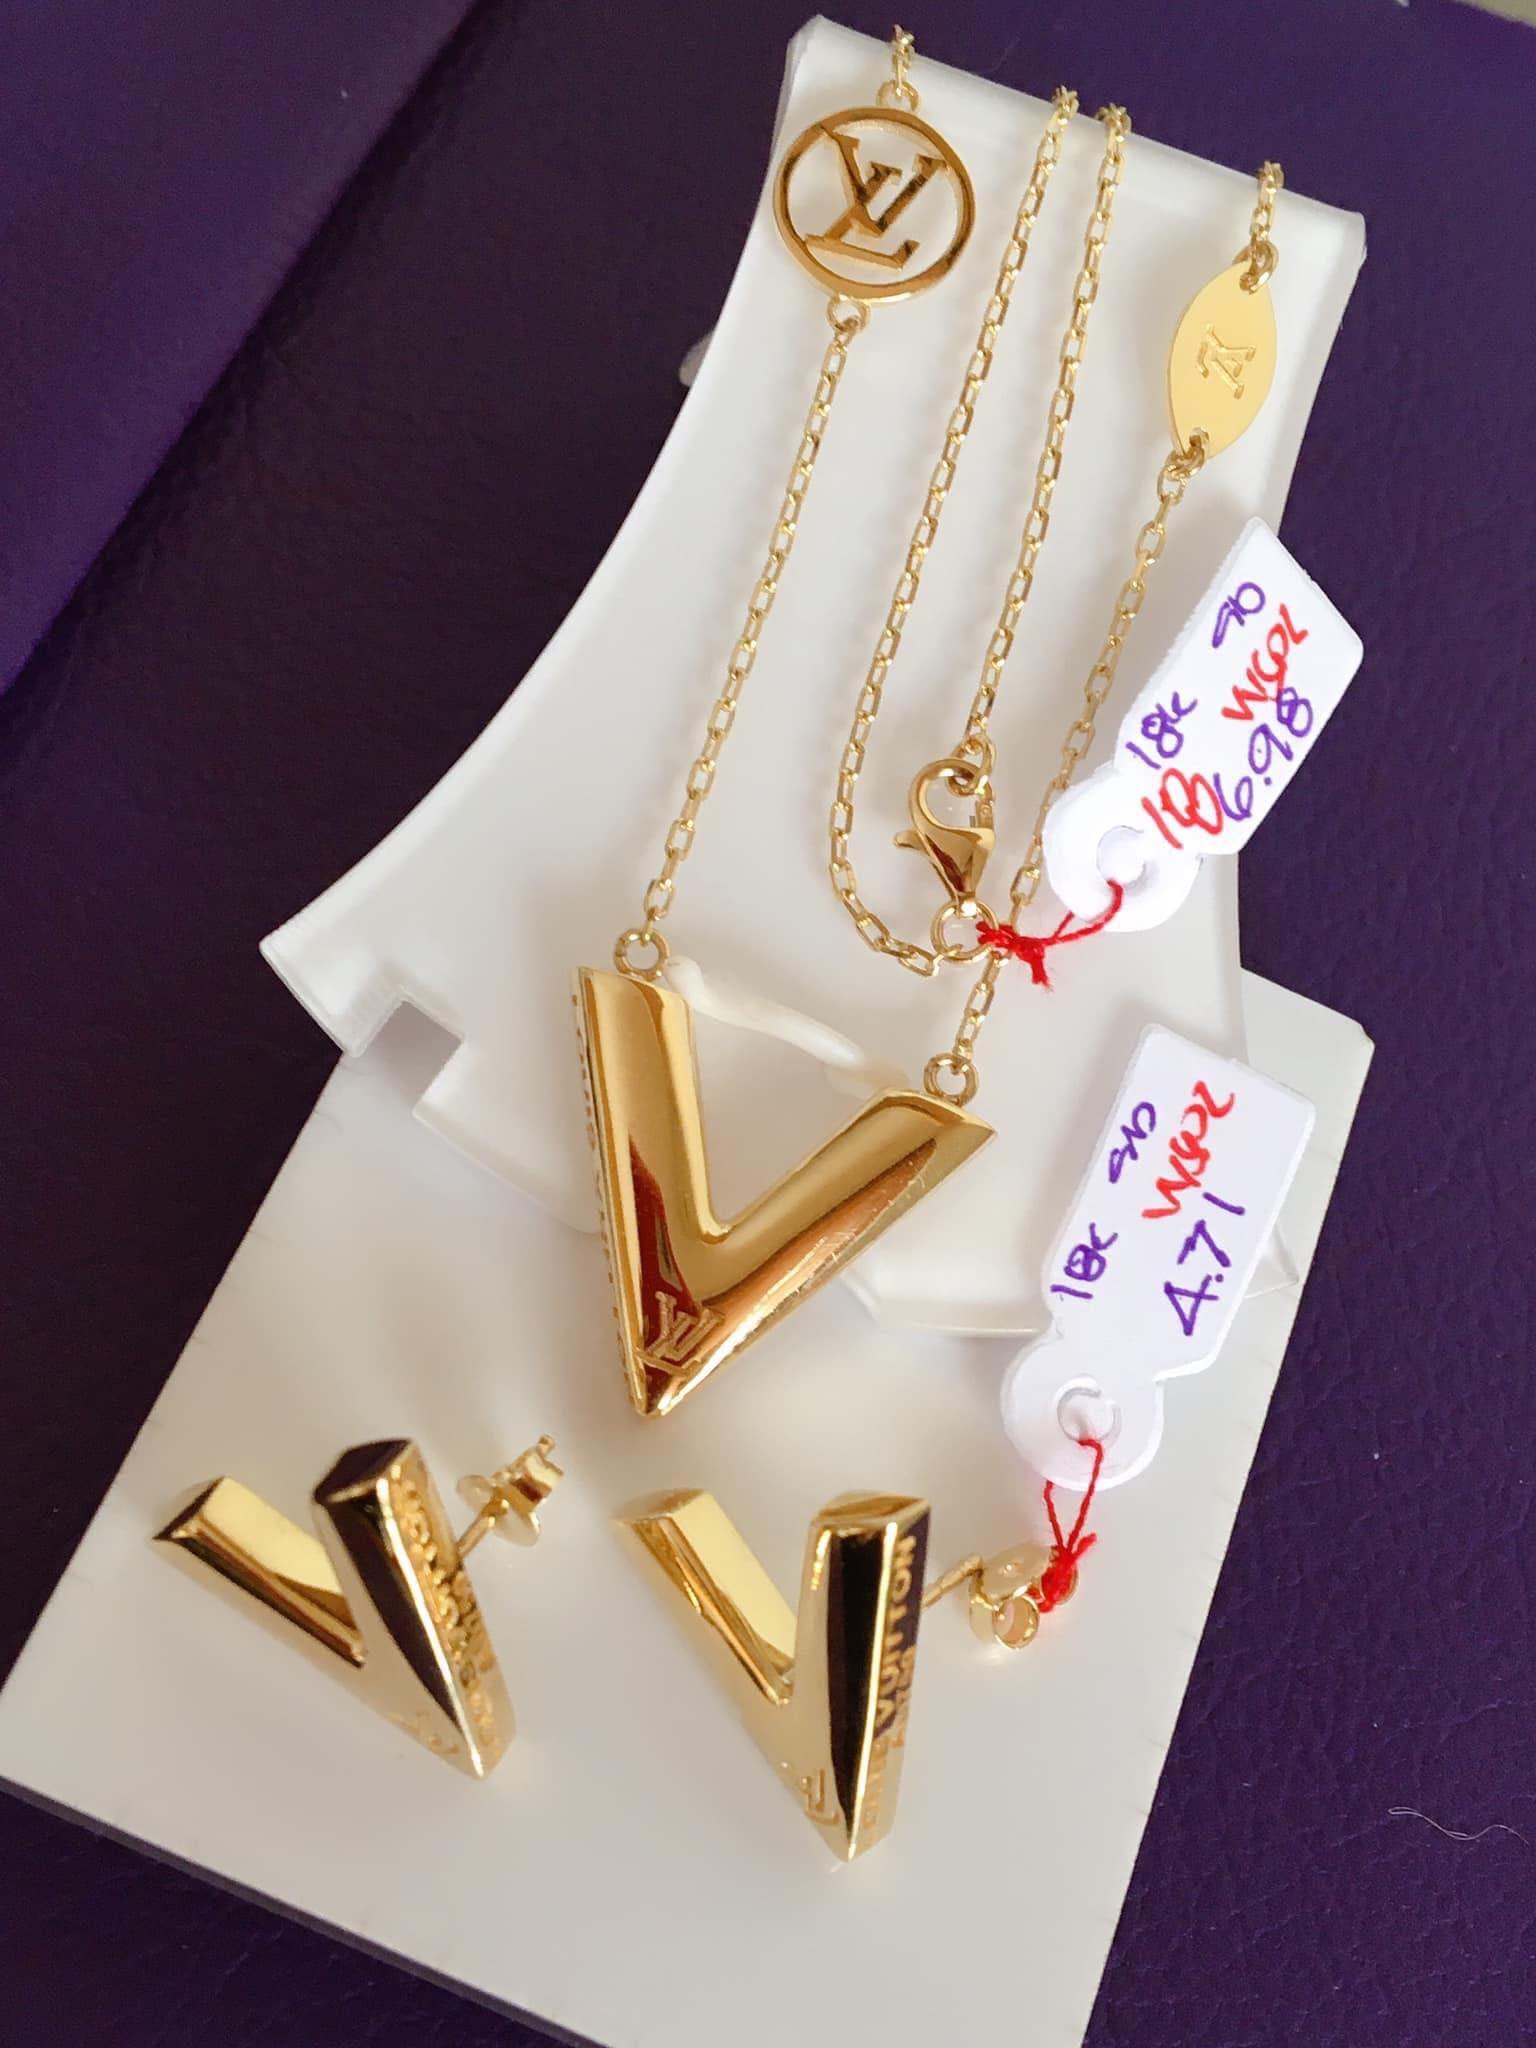 LV Inspired Necklace & Earings